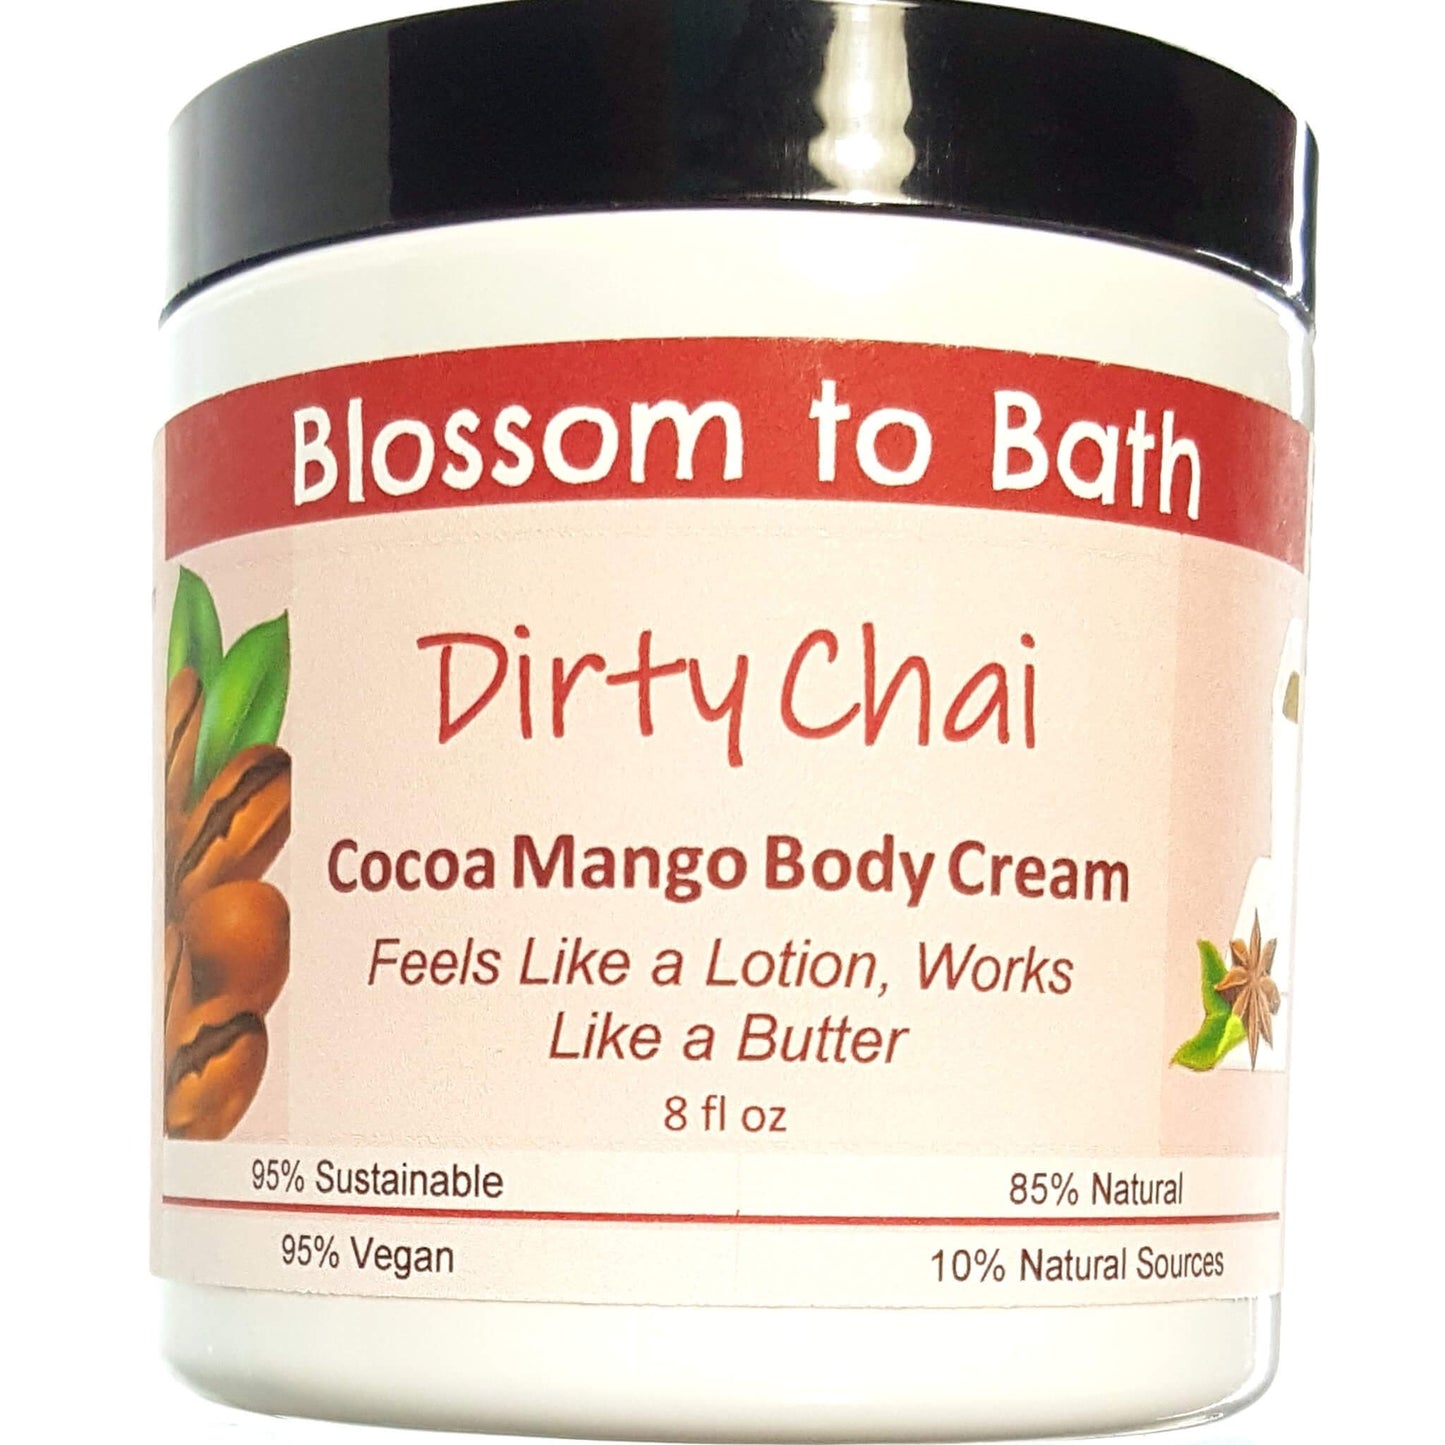 Buy Blossom to Bath Dirty Chai Cocoa Mango Body Cream from Flowersong Soap Studio.  Rich organic butters  soften and moisturize even the roughest skin all day  A shot of rich espresso in a swirl of exotic warm clove and cardamom.